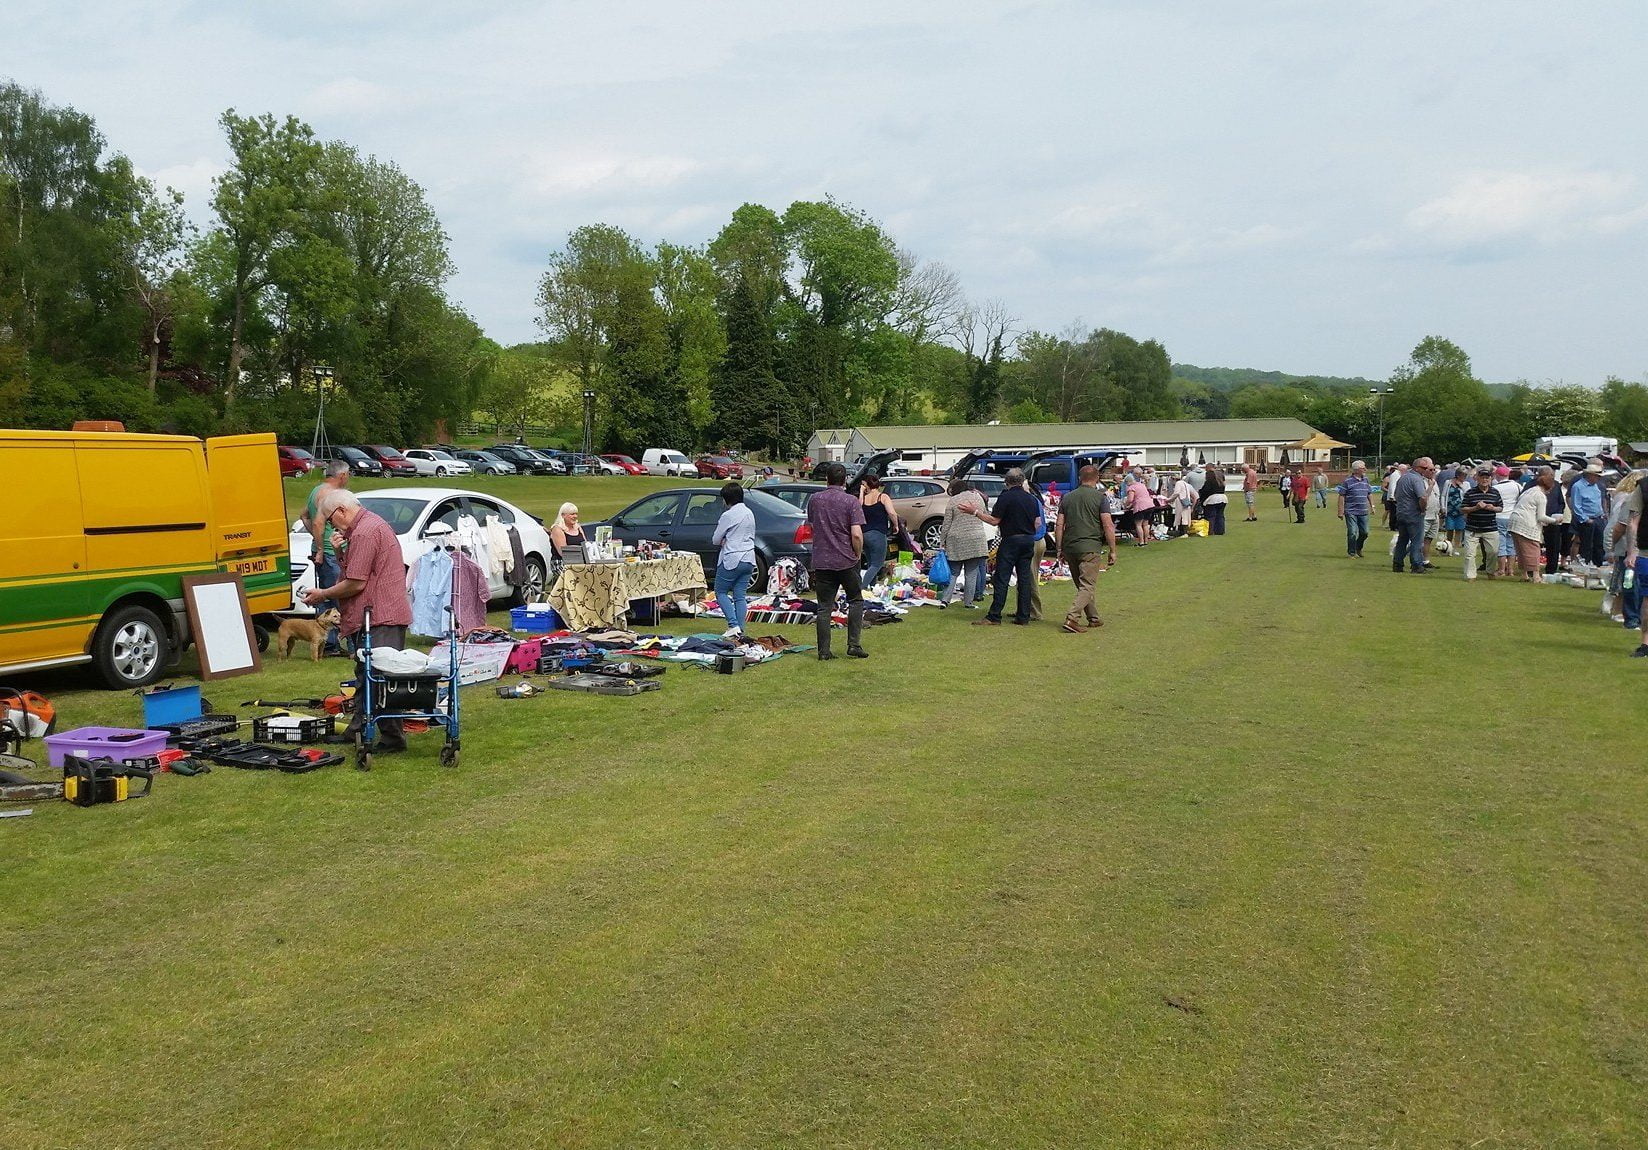 Wales – The Carboot Directory